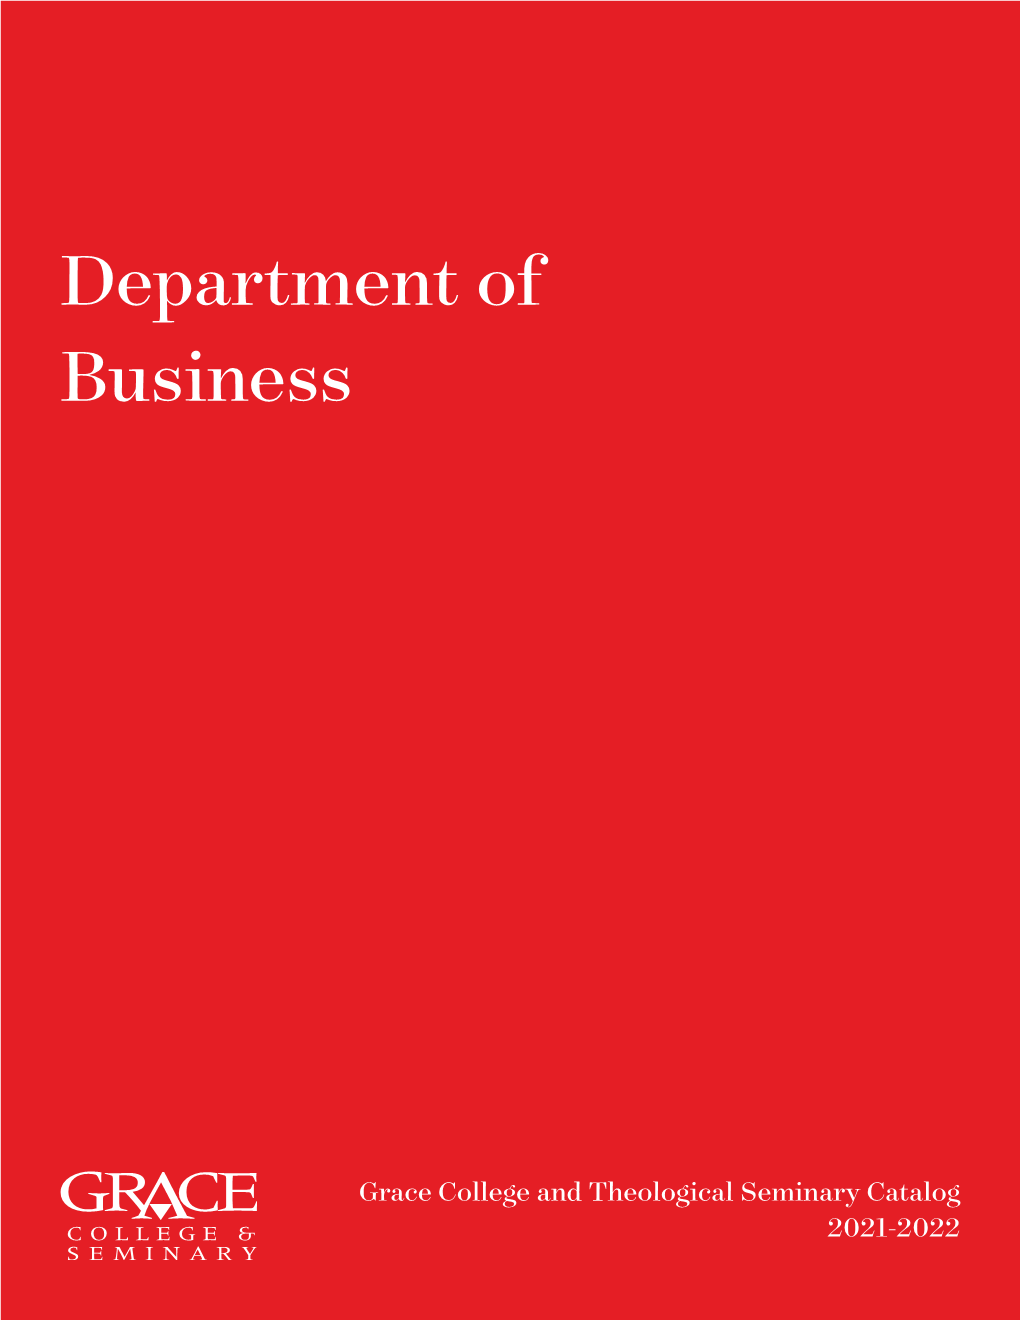 Department of Business